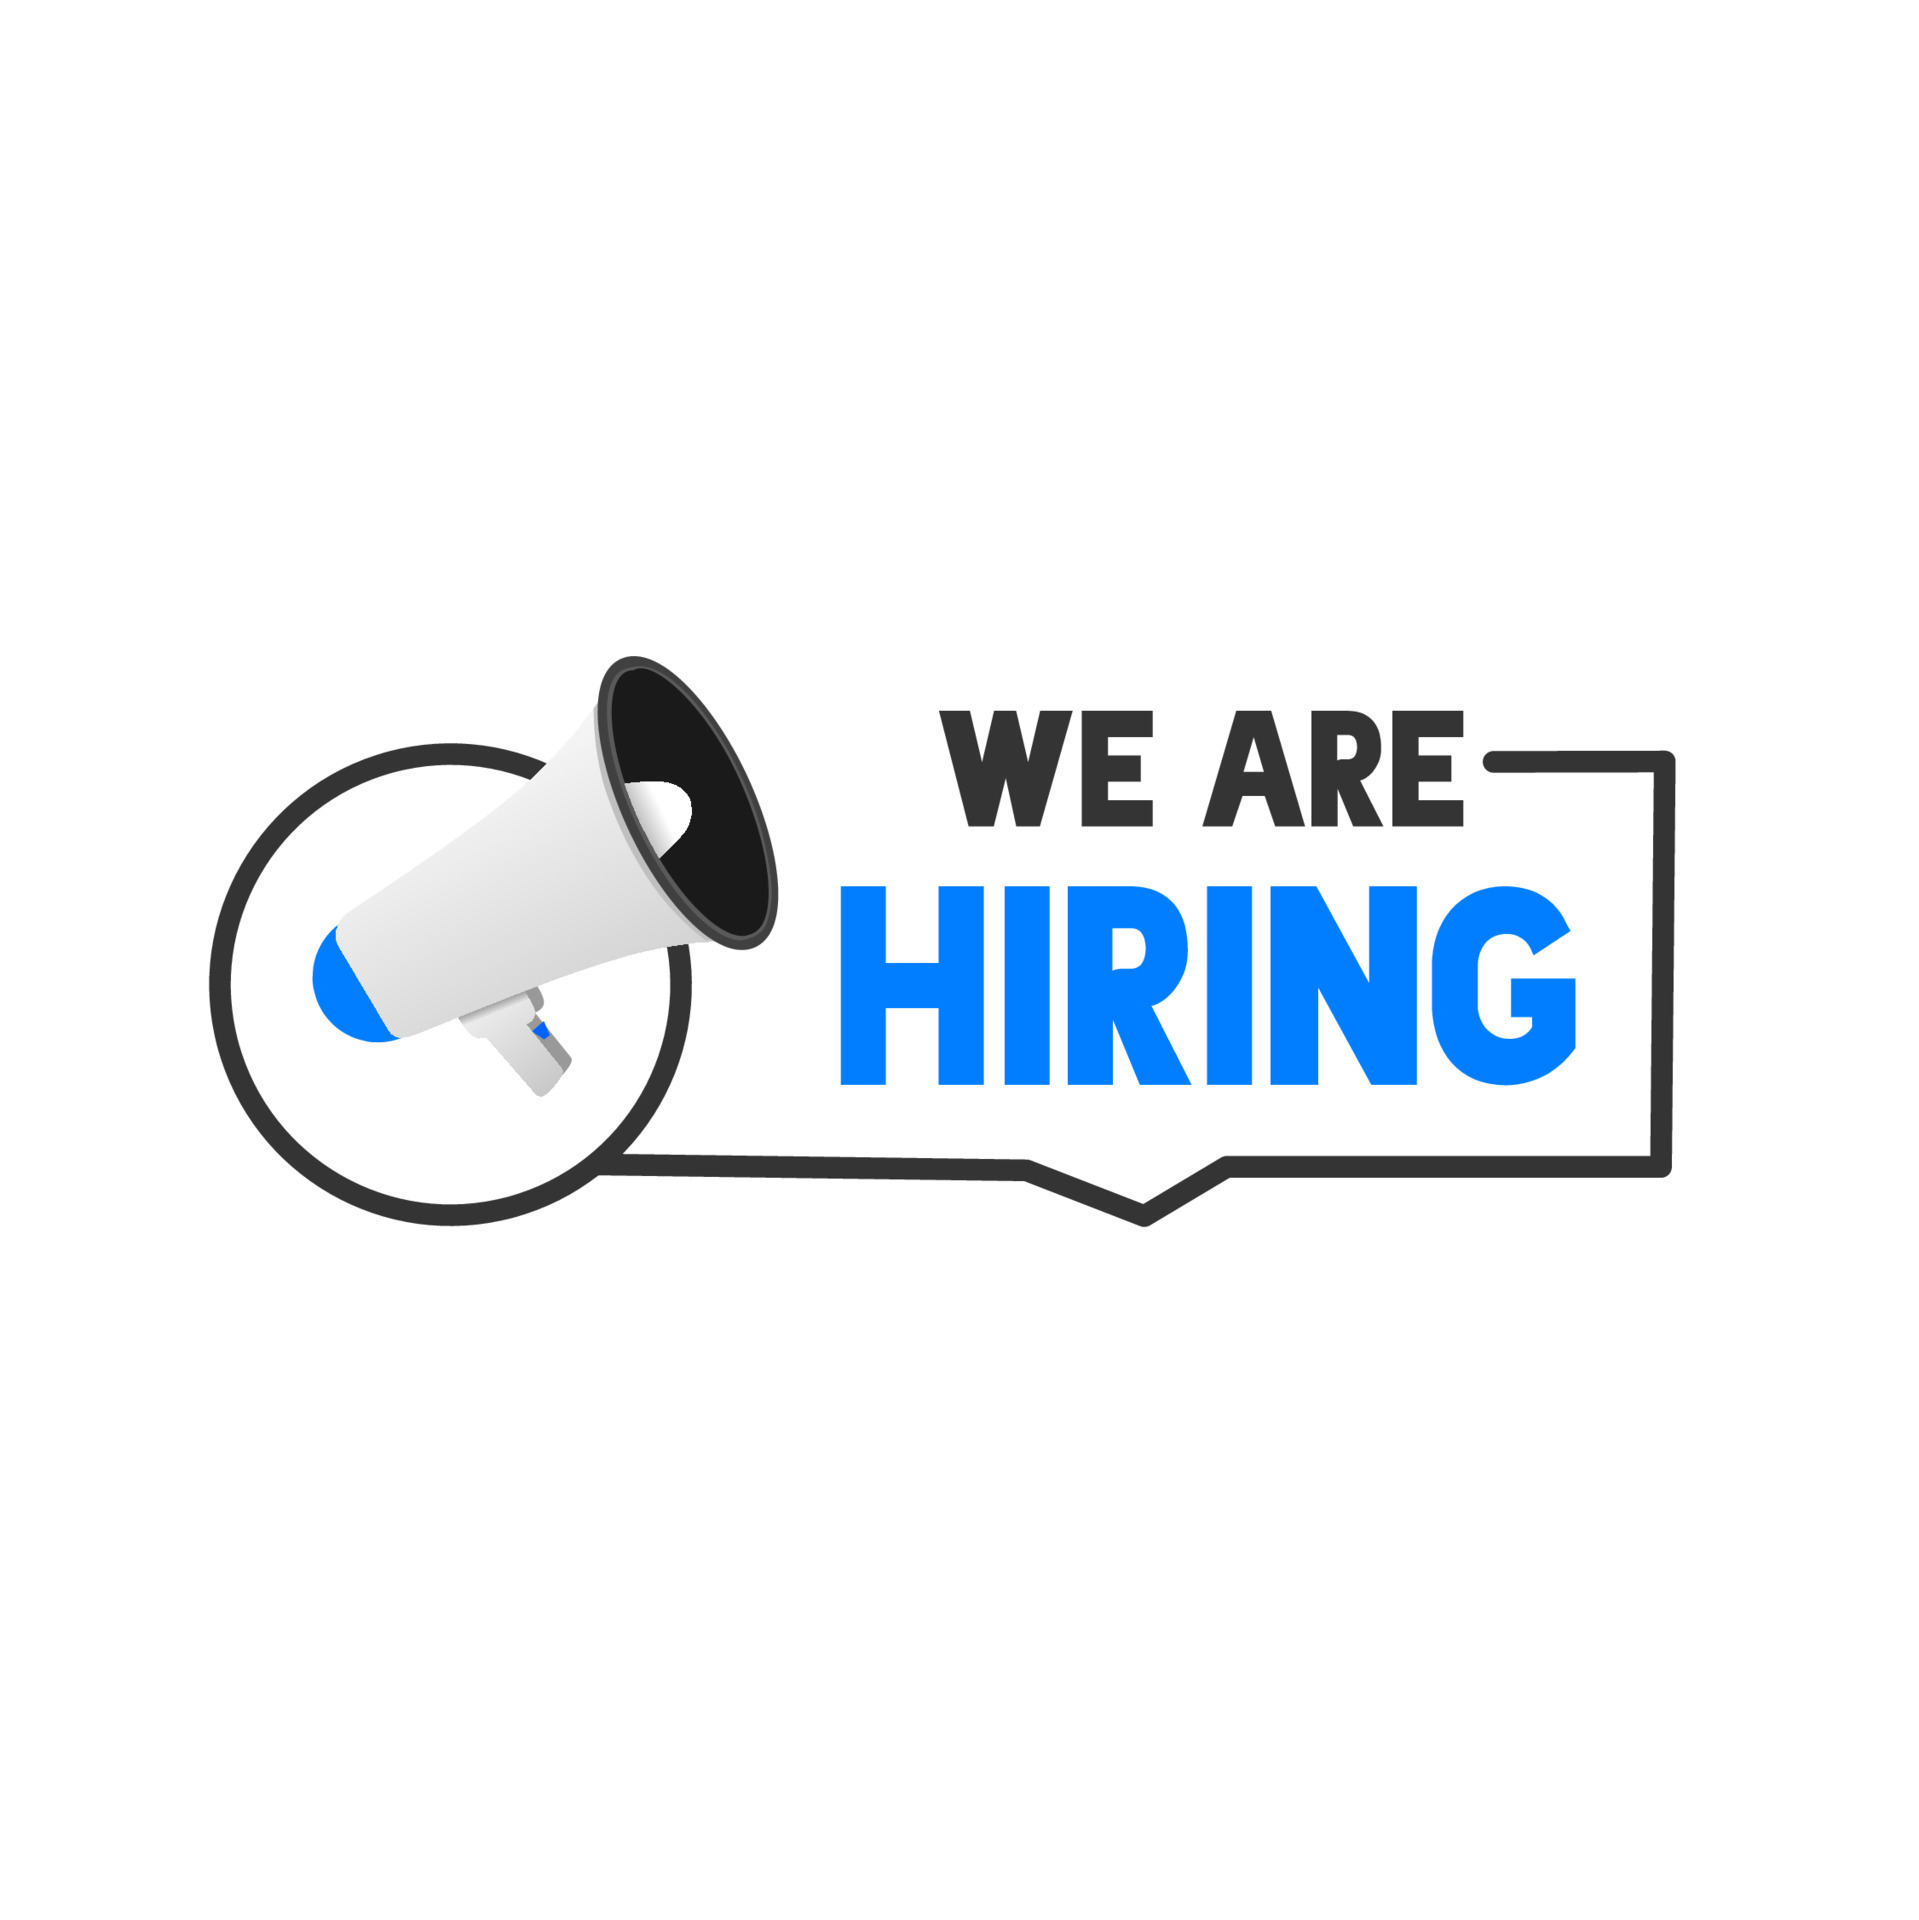 We Are Hiring Poster Stock Photos Pictures  RoyaltyFree Images  iStock